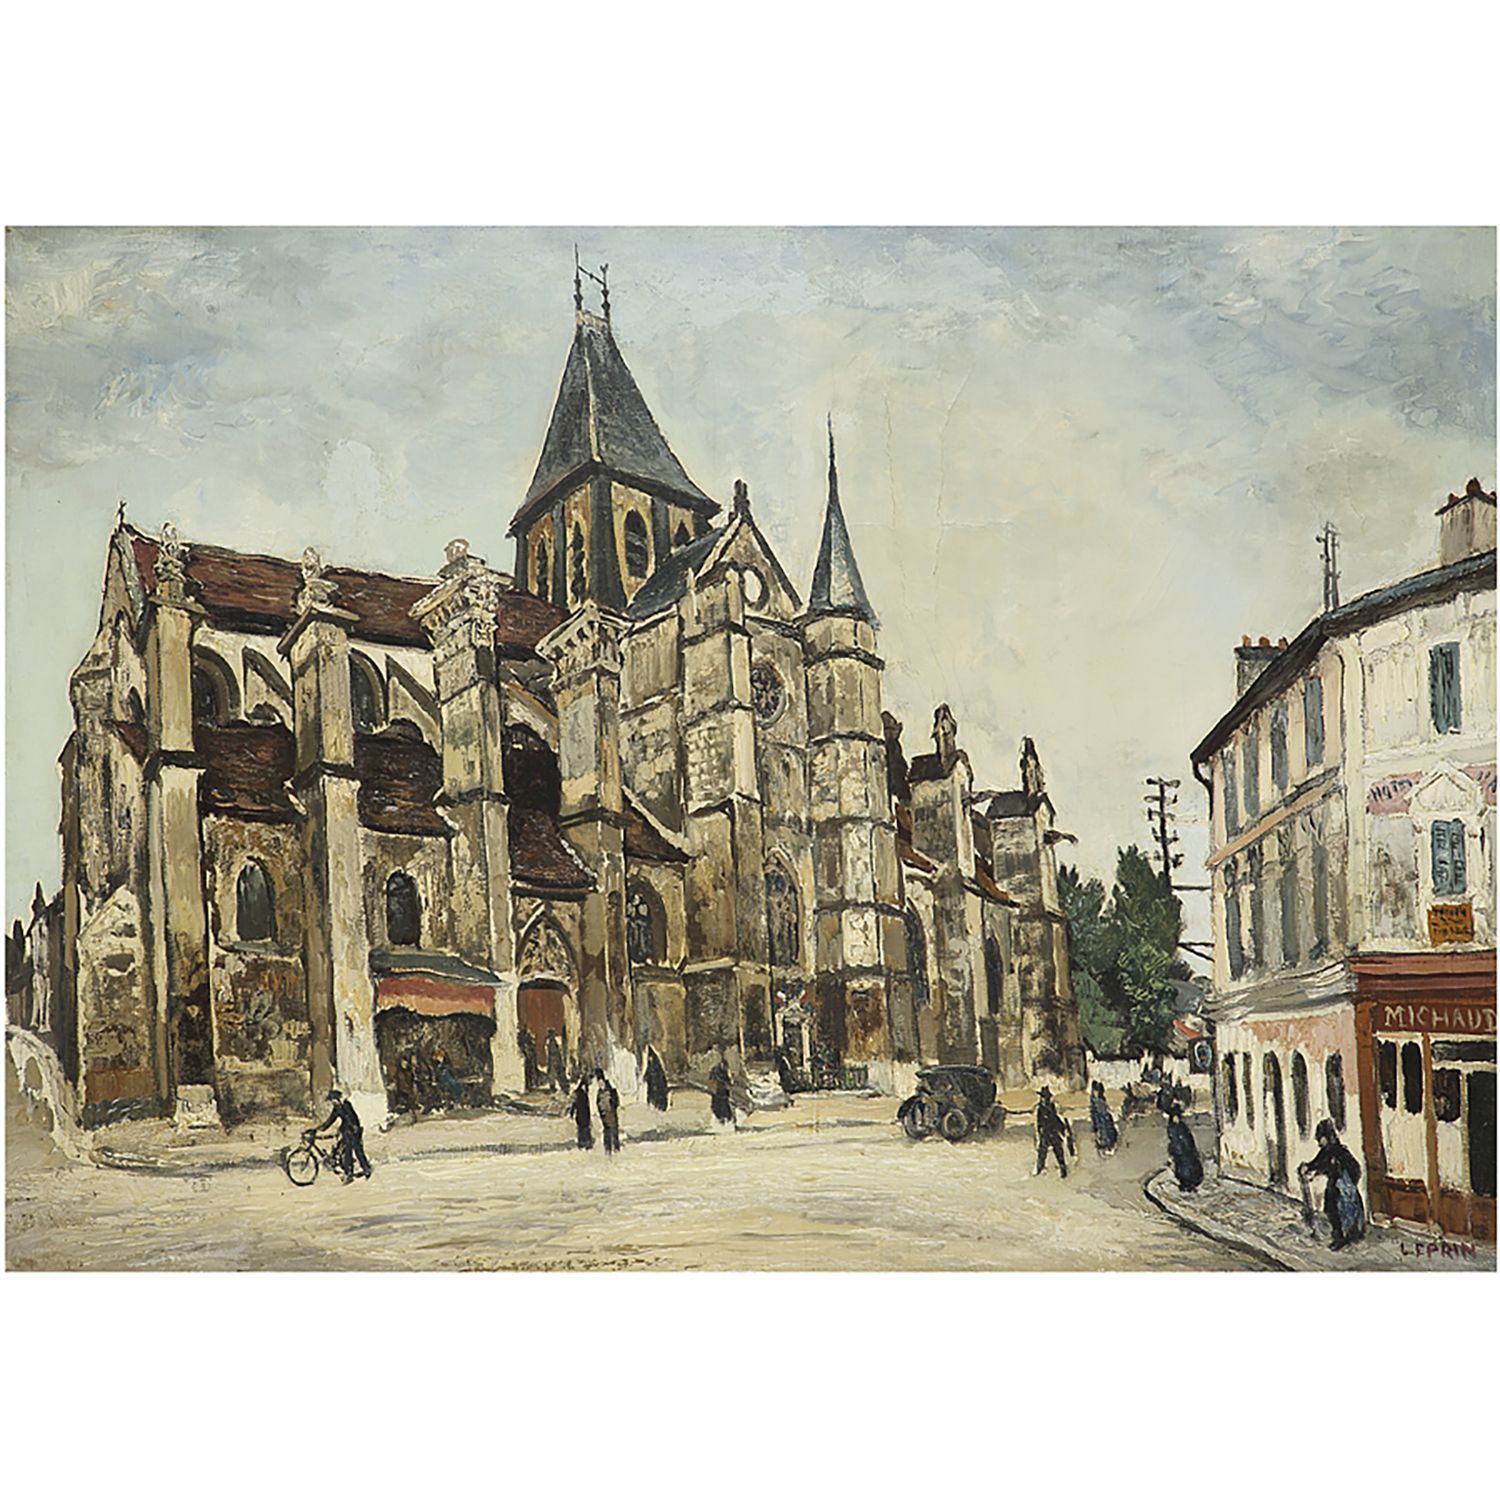 Null MARCEL LEPRIN (1891-1933)

VIEW OF A CHURCH

Oil on canvas

Signed lower ri&hellip;